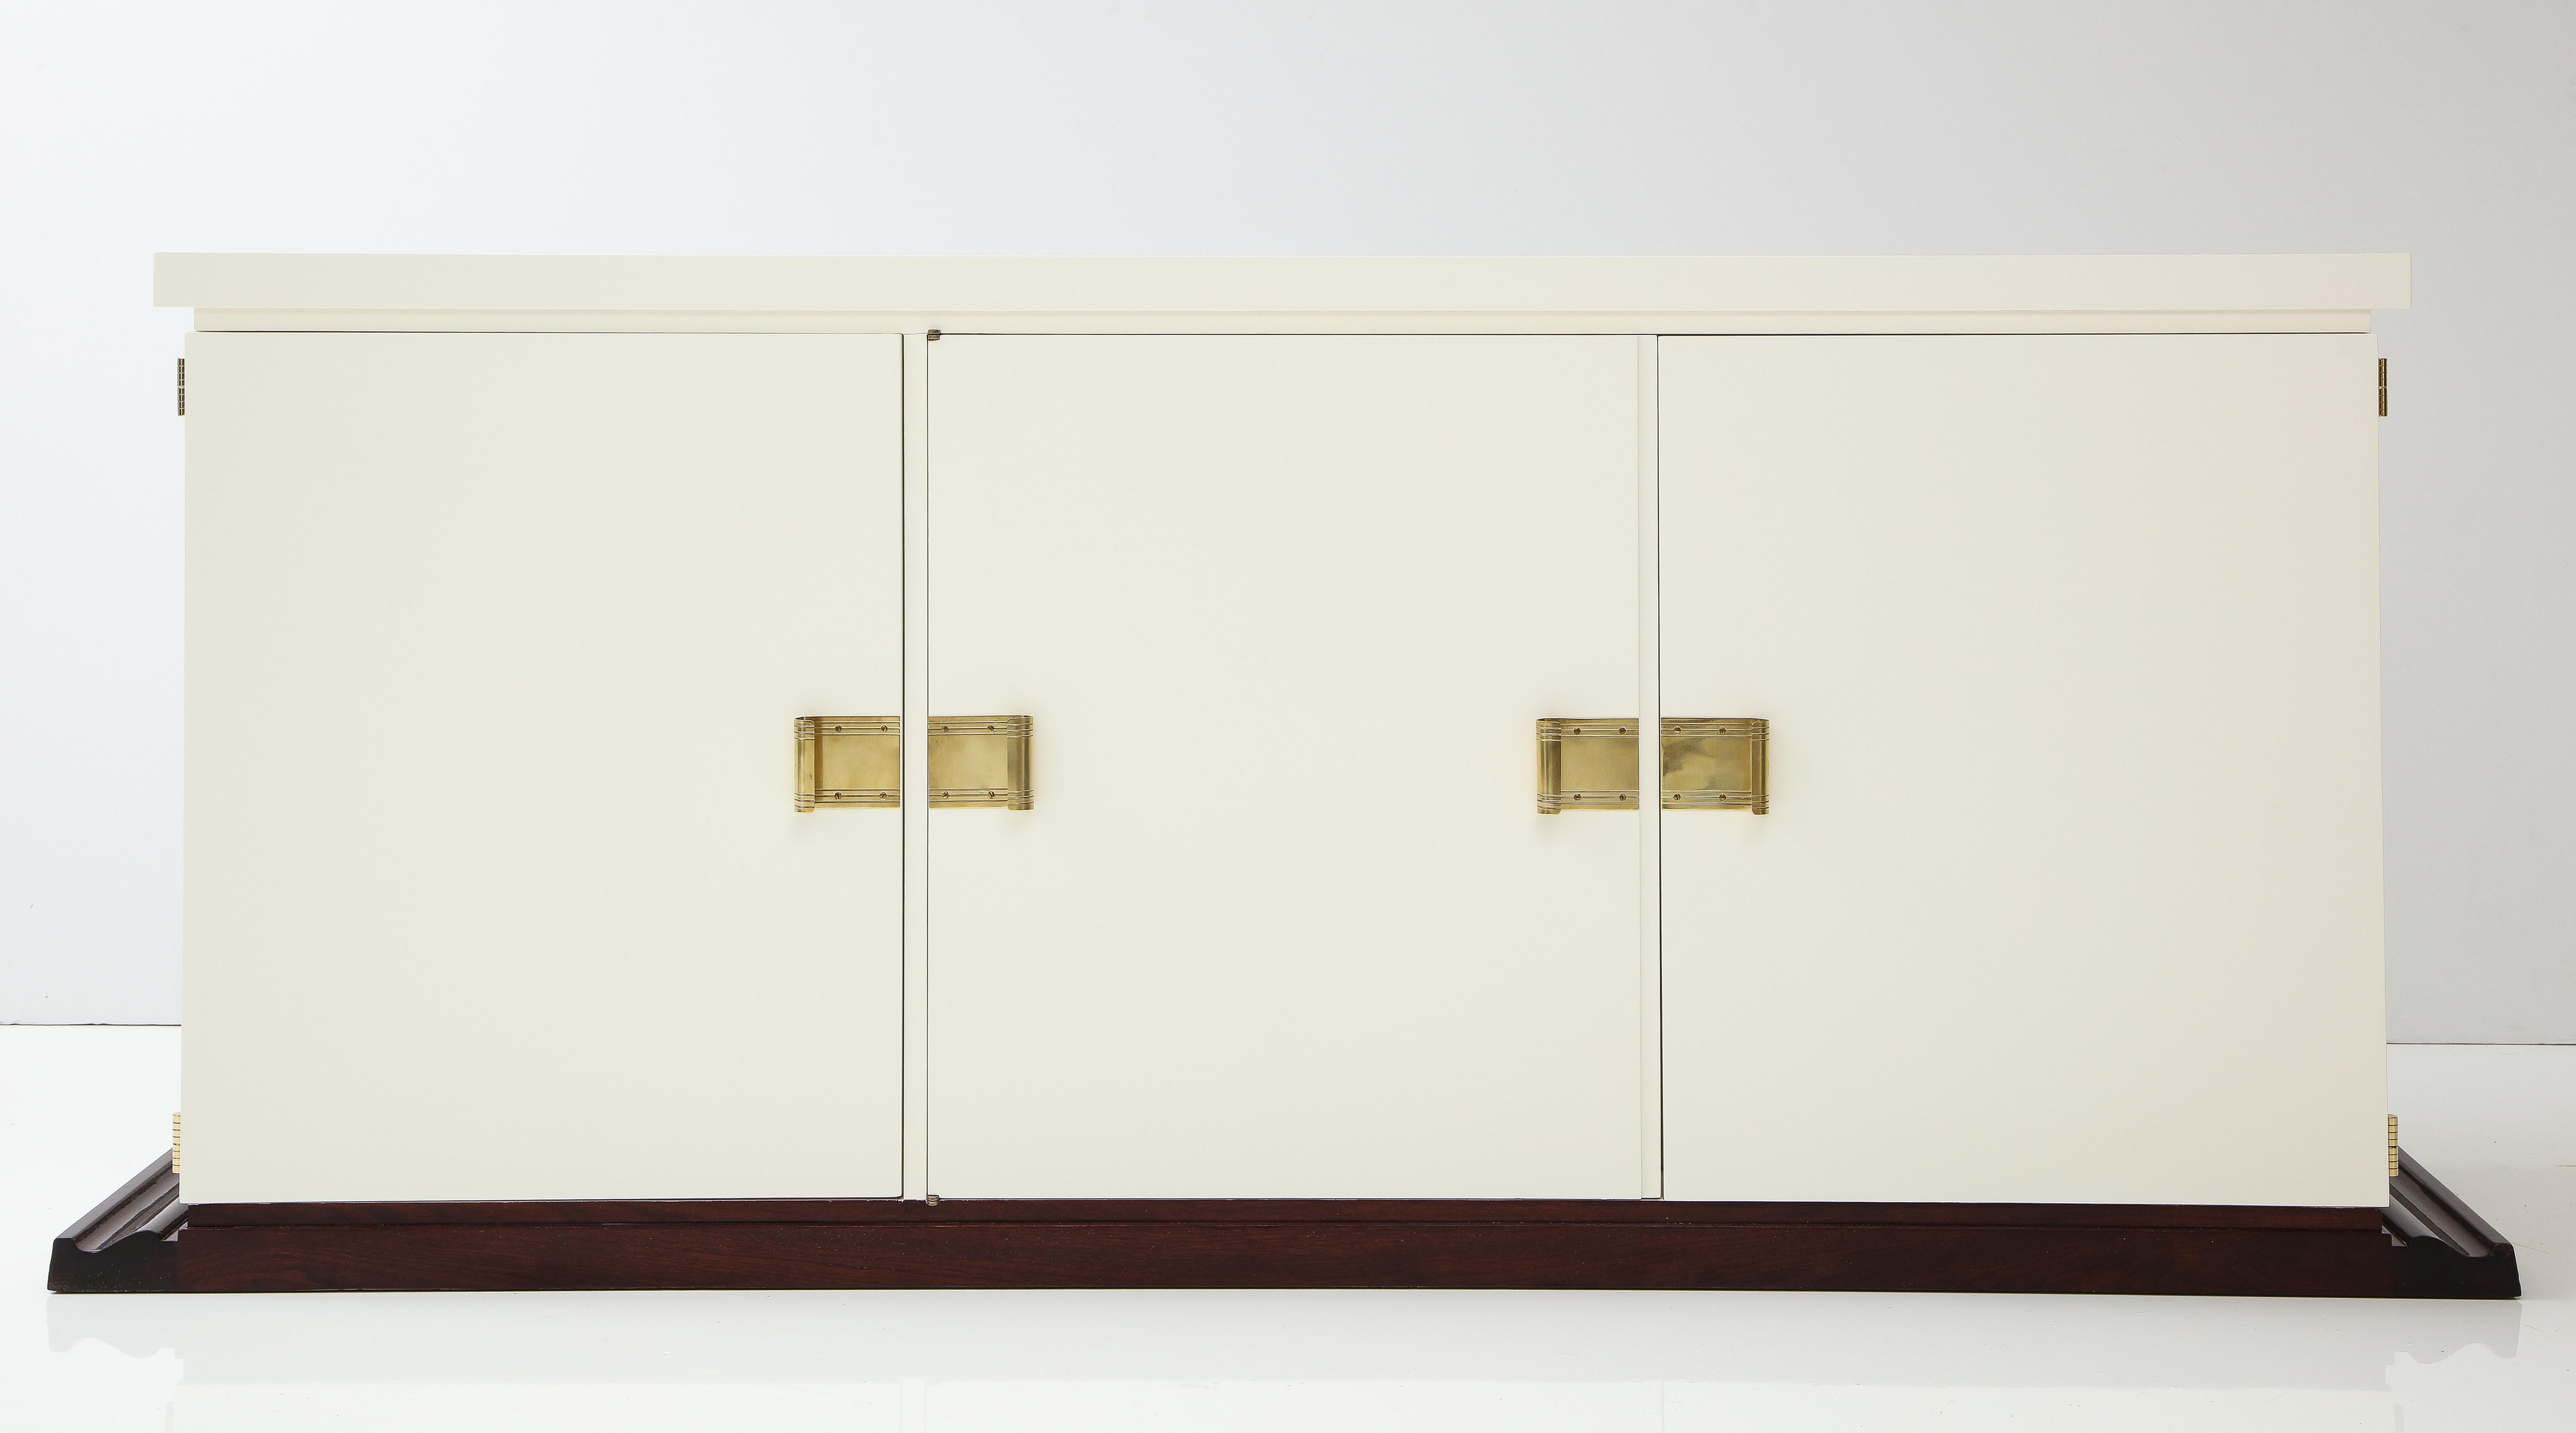 Stunning Tommi Parzinger cabinet.
Sleek sophisticated cabinet Newly restored in an ivory satin finish set on a rich Mahogany plinth base.
The cabinet has two sets of drawers with the left side having four smaller and the right side having four